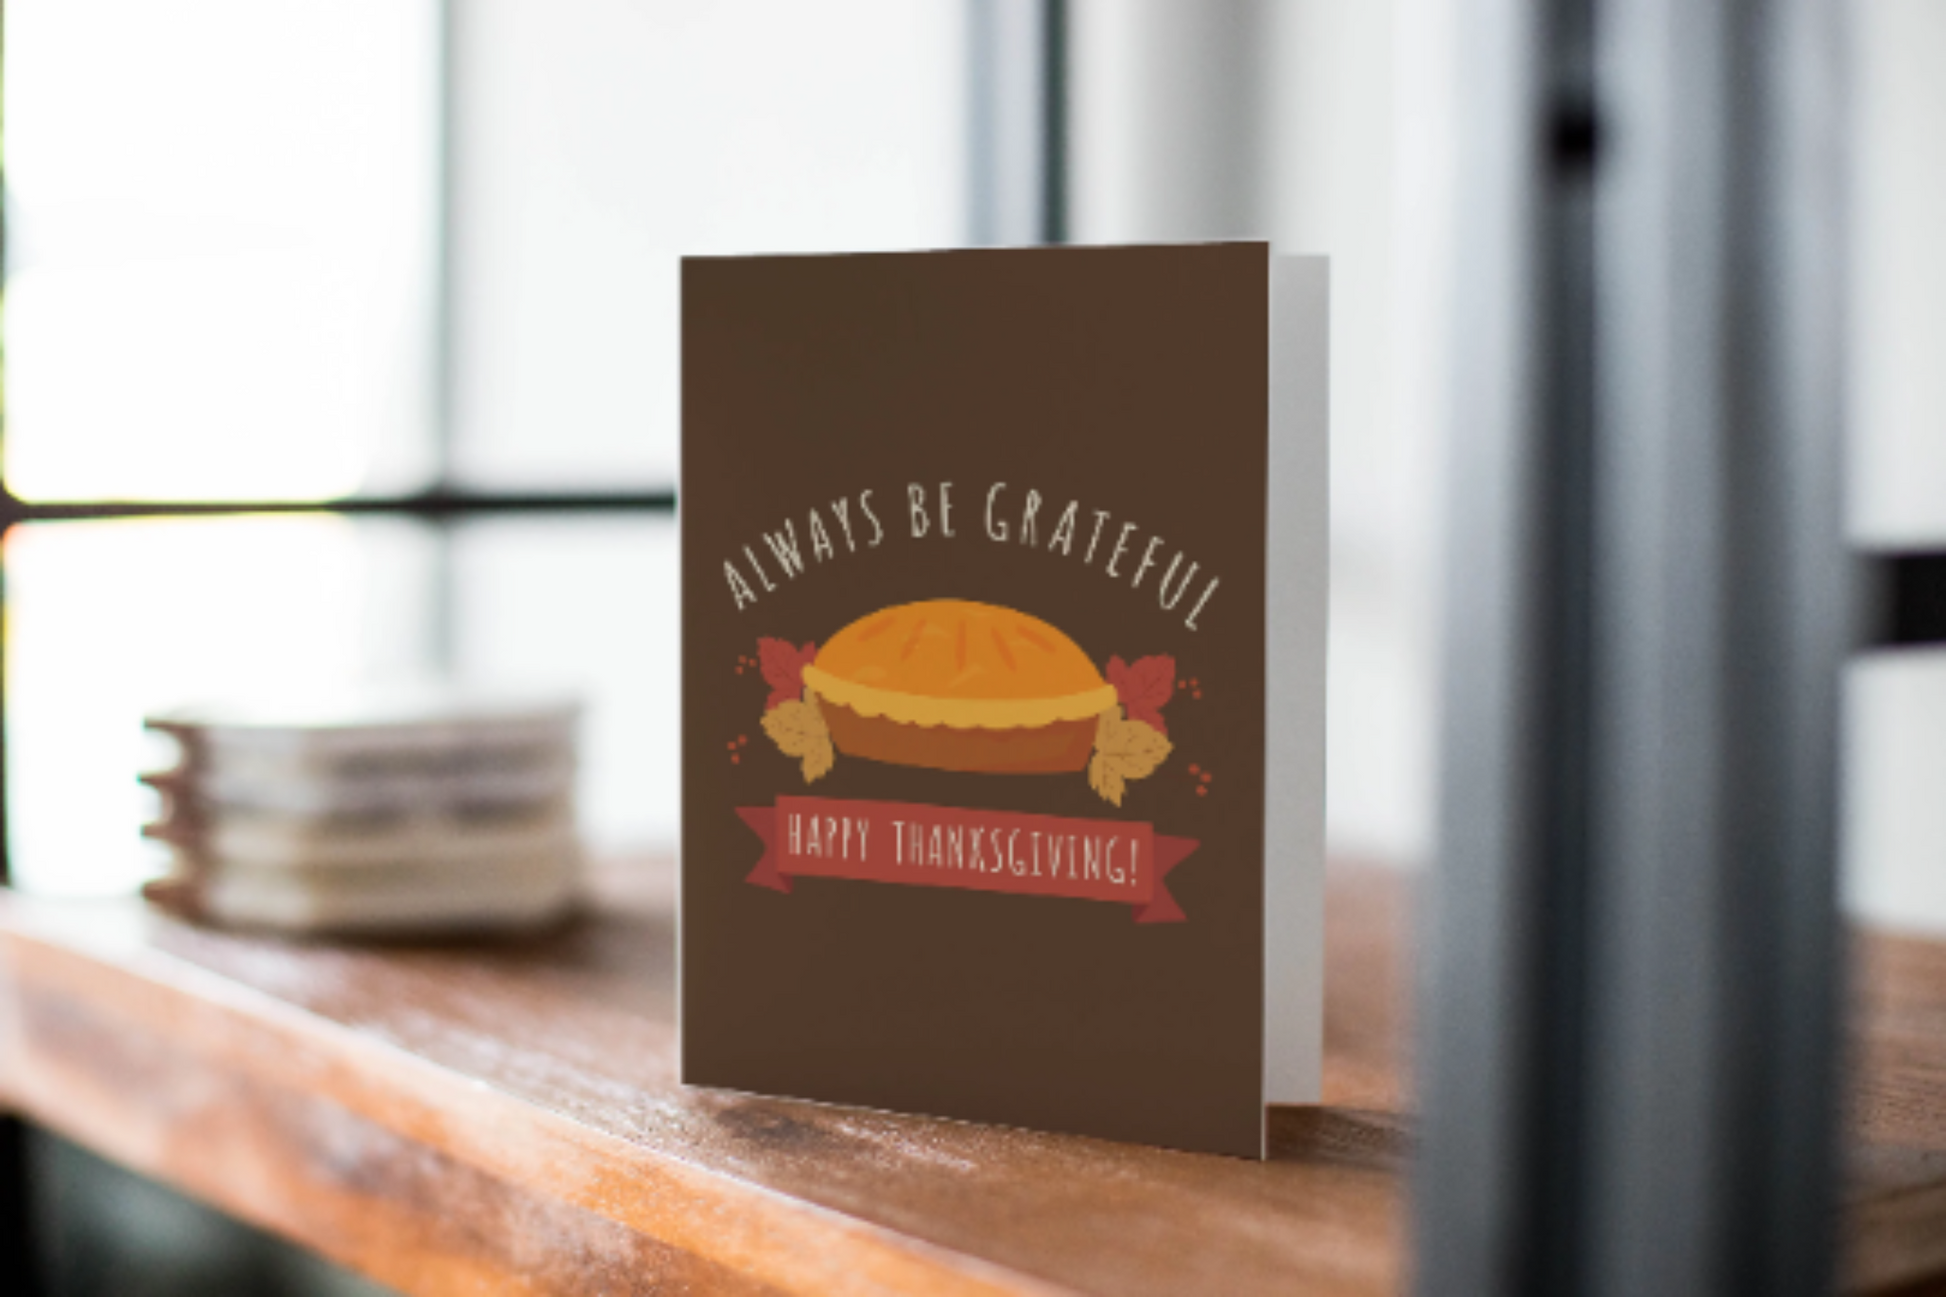 Happy Thanksgiving Greeting Card: Always Be Grateful, Note Card.